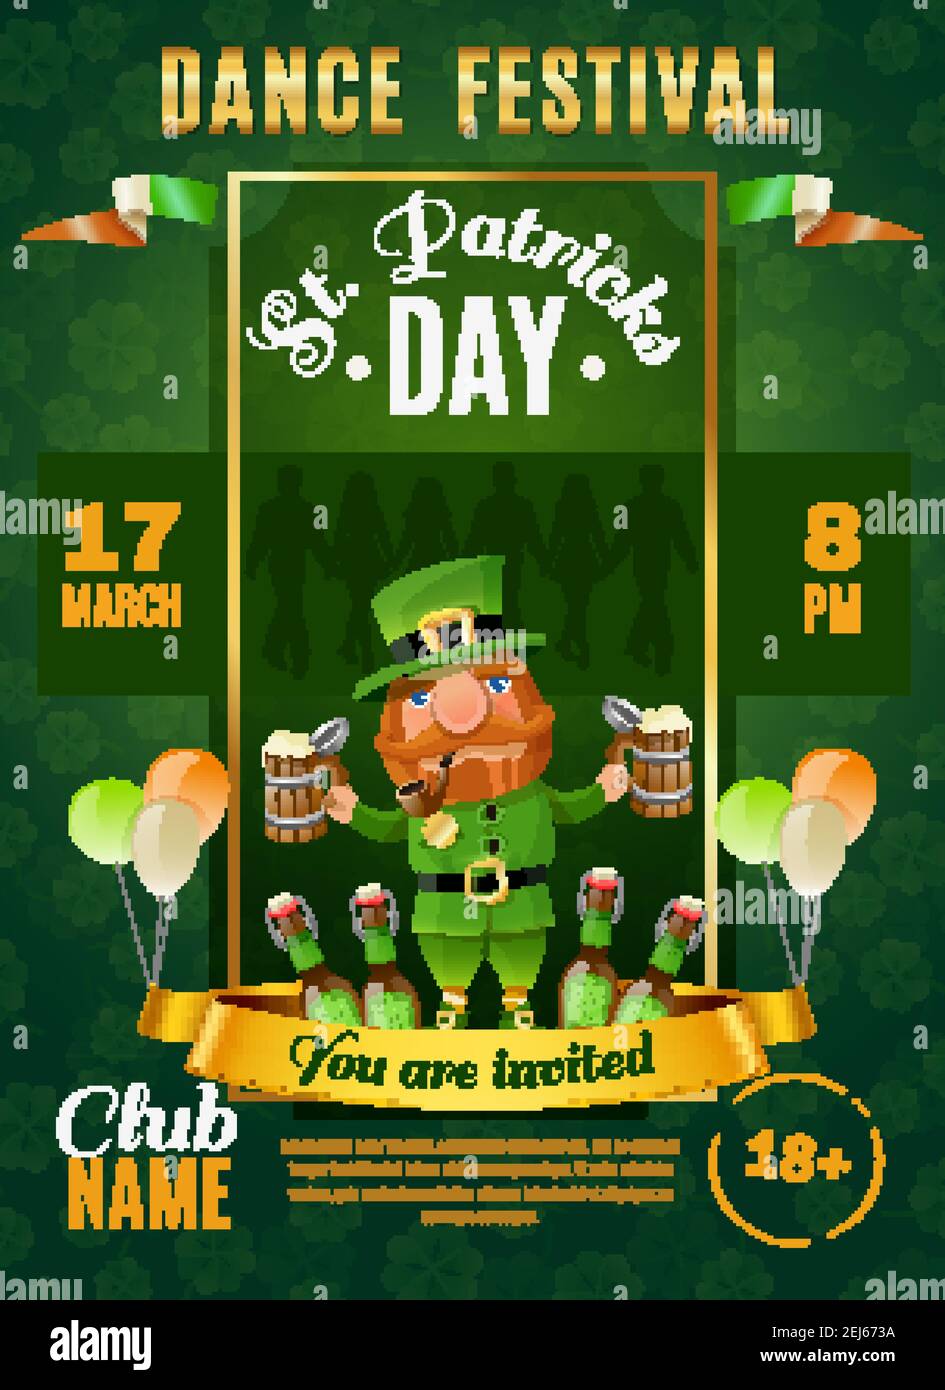 Green Cartoon Saint Patricks Day Party Event Poster Template and Ideas for  Design